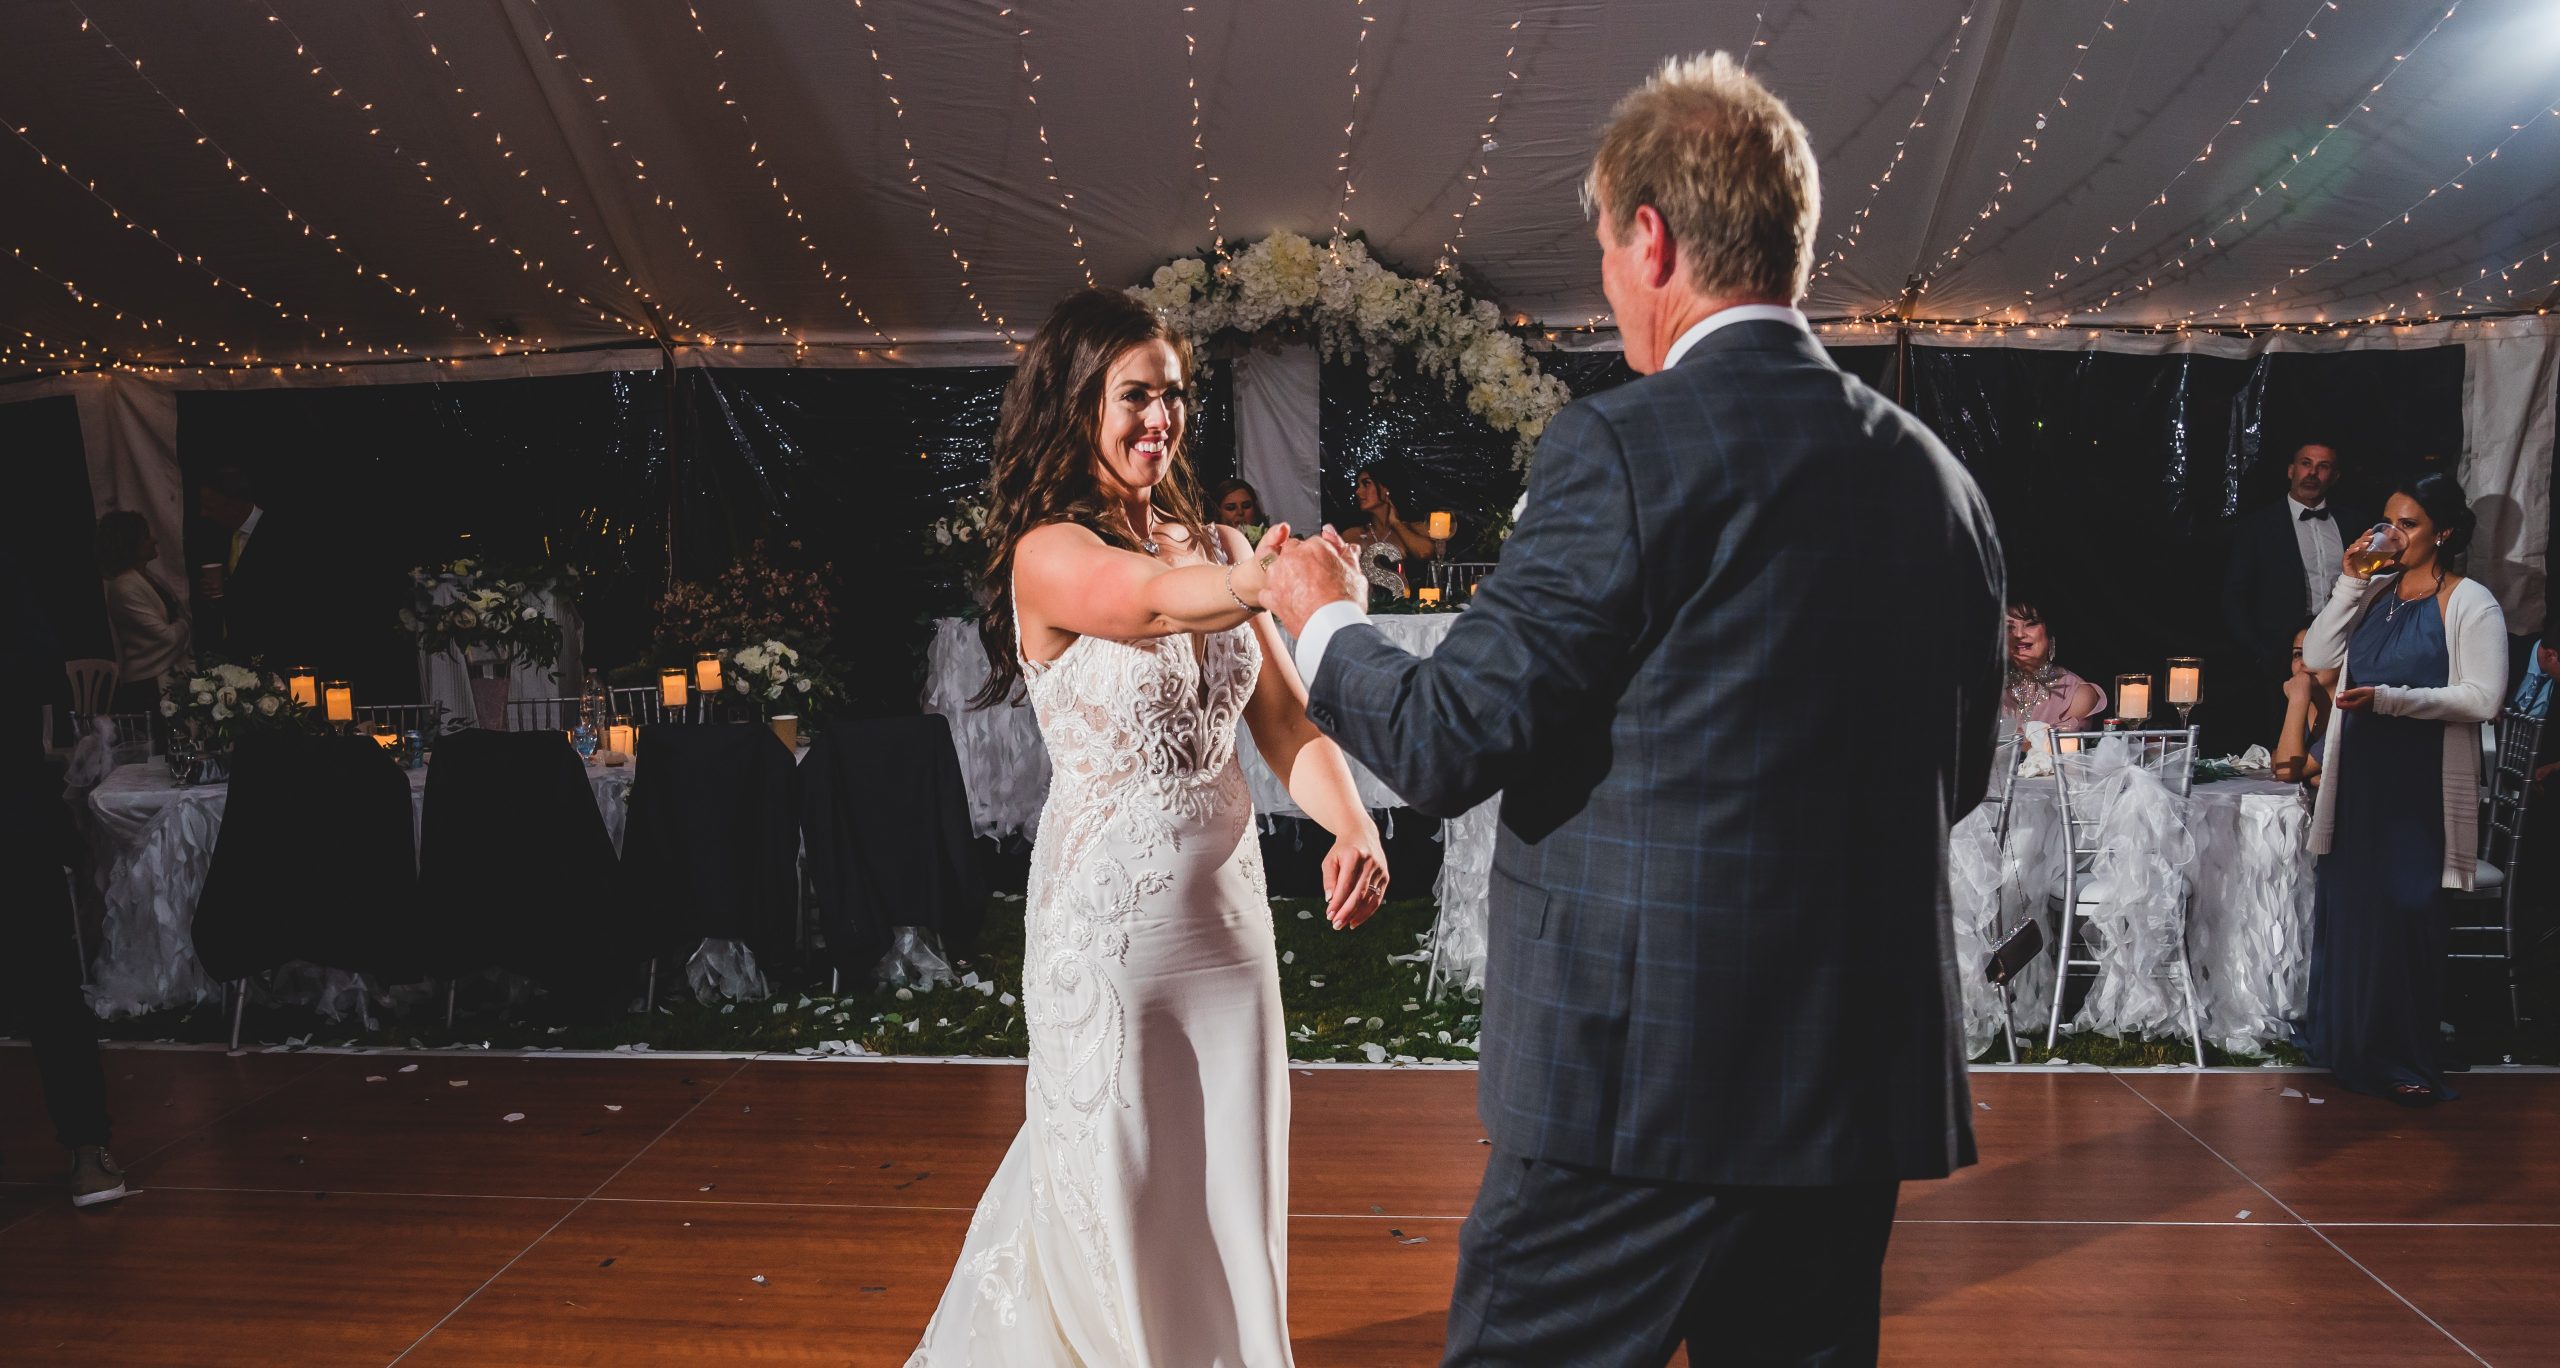 father daughter dance songs ultimate wedding playlist gary evans photography